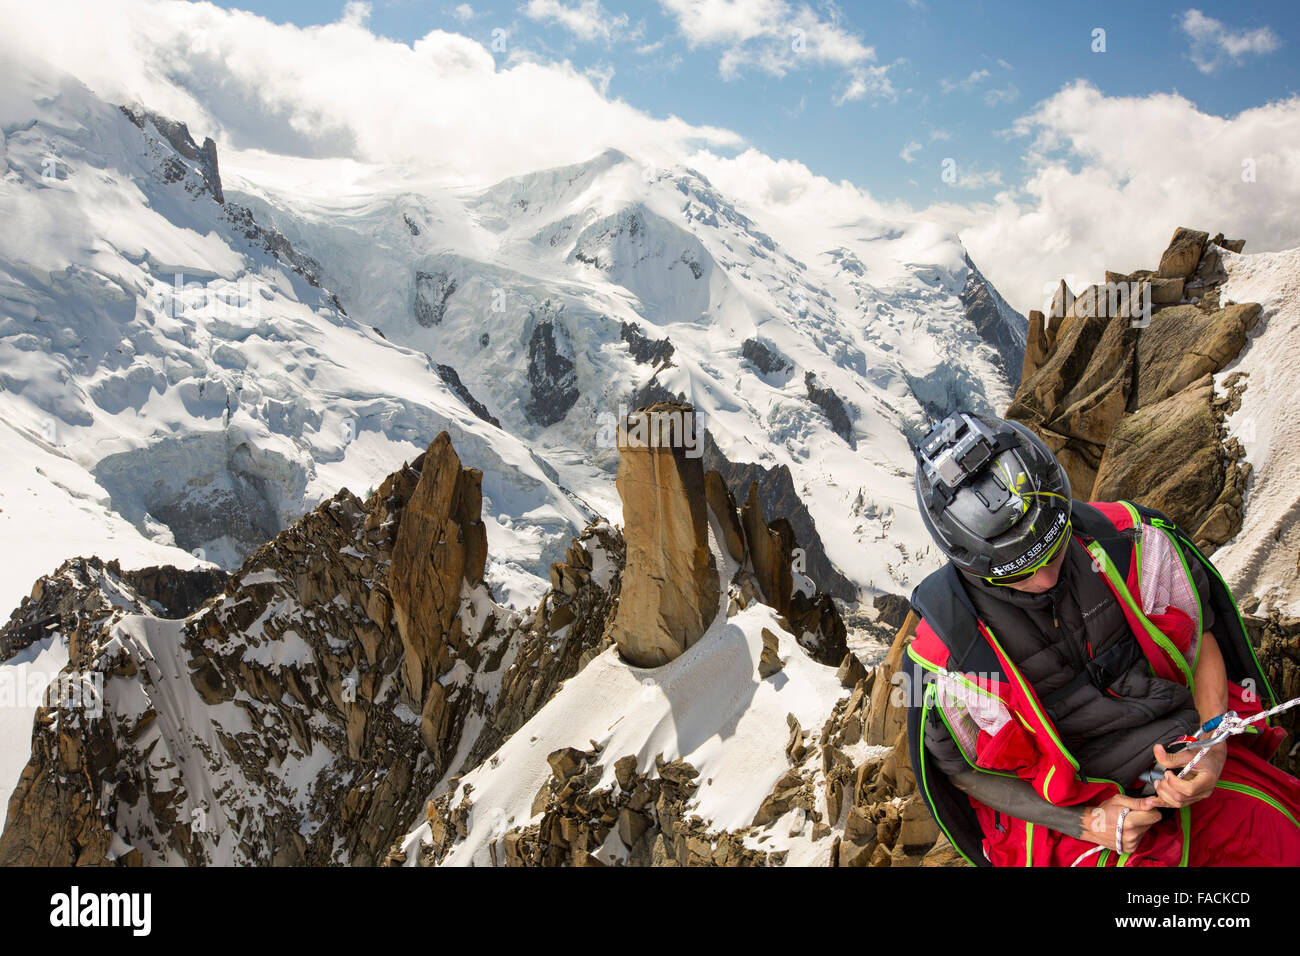 The Cosmiques Aret leading onto the Aiguille Du Midi above Chamonix, France and a base jumper abseiling. Stock Photo